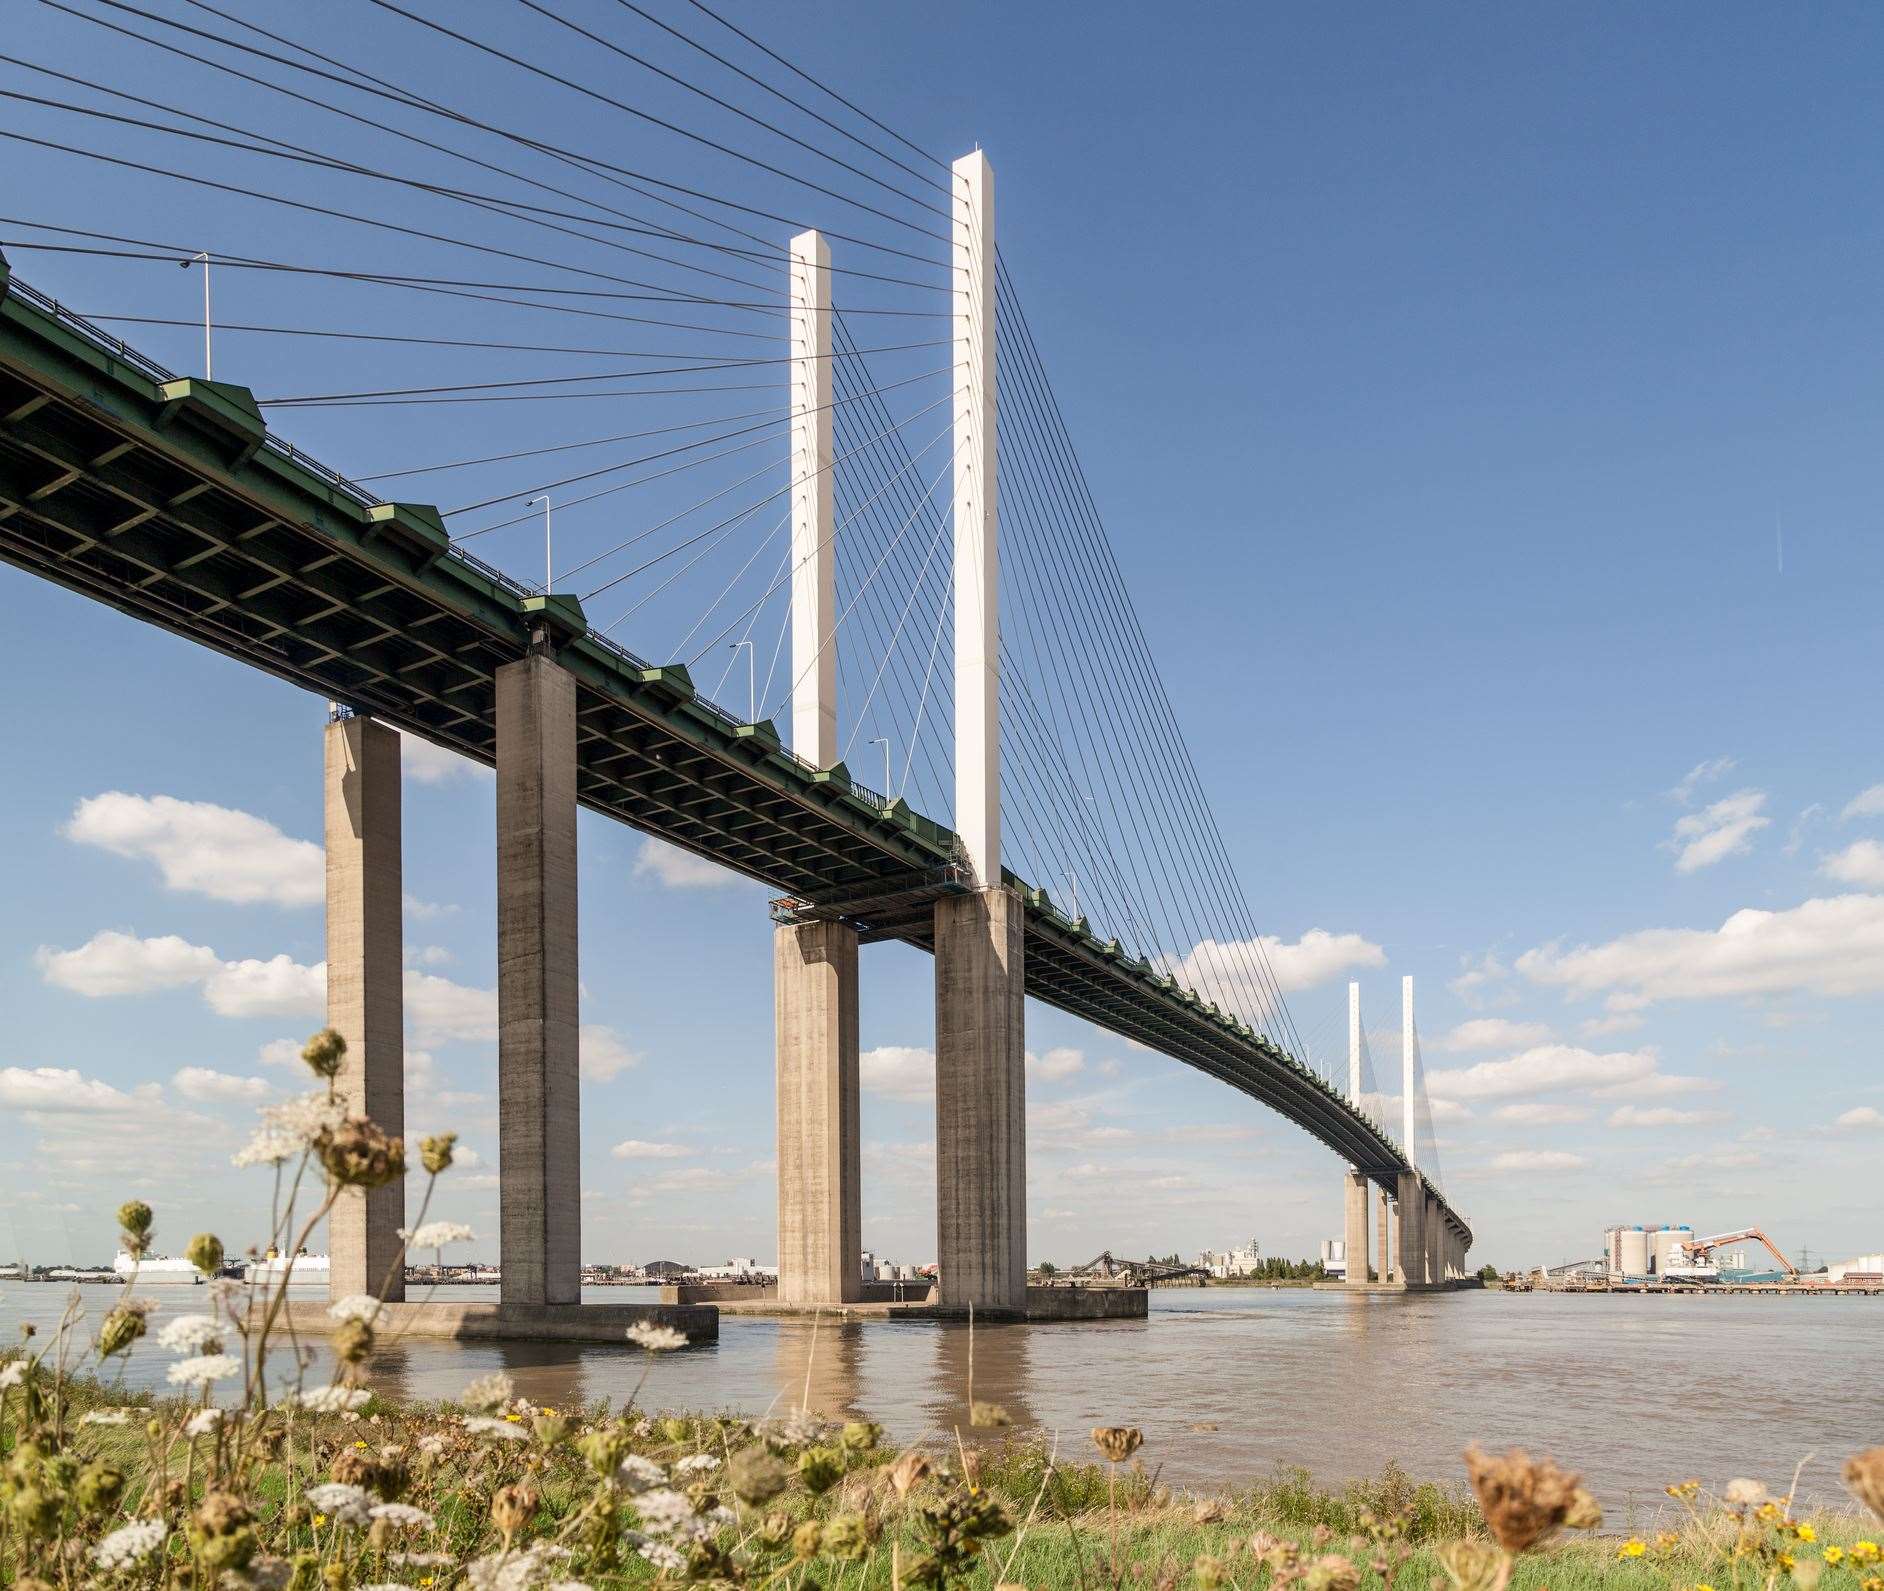 The Dartford Crossing saw a 9% increase in traffic carrying goods and food bringing it to 42% of all journeys